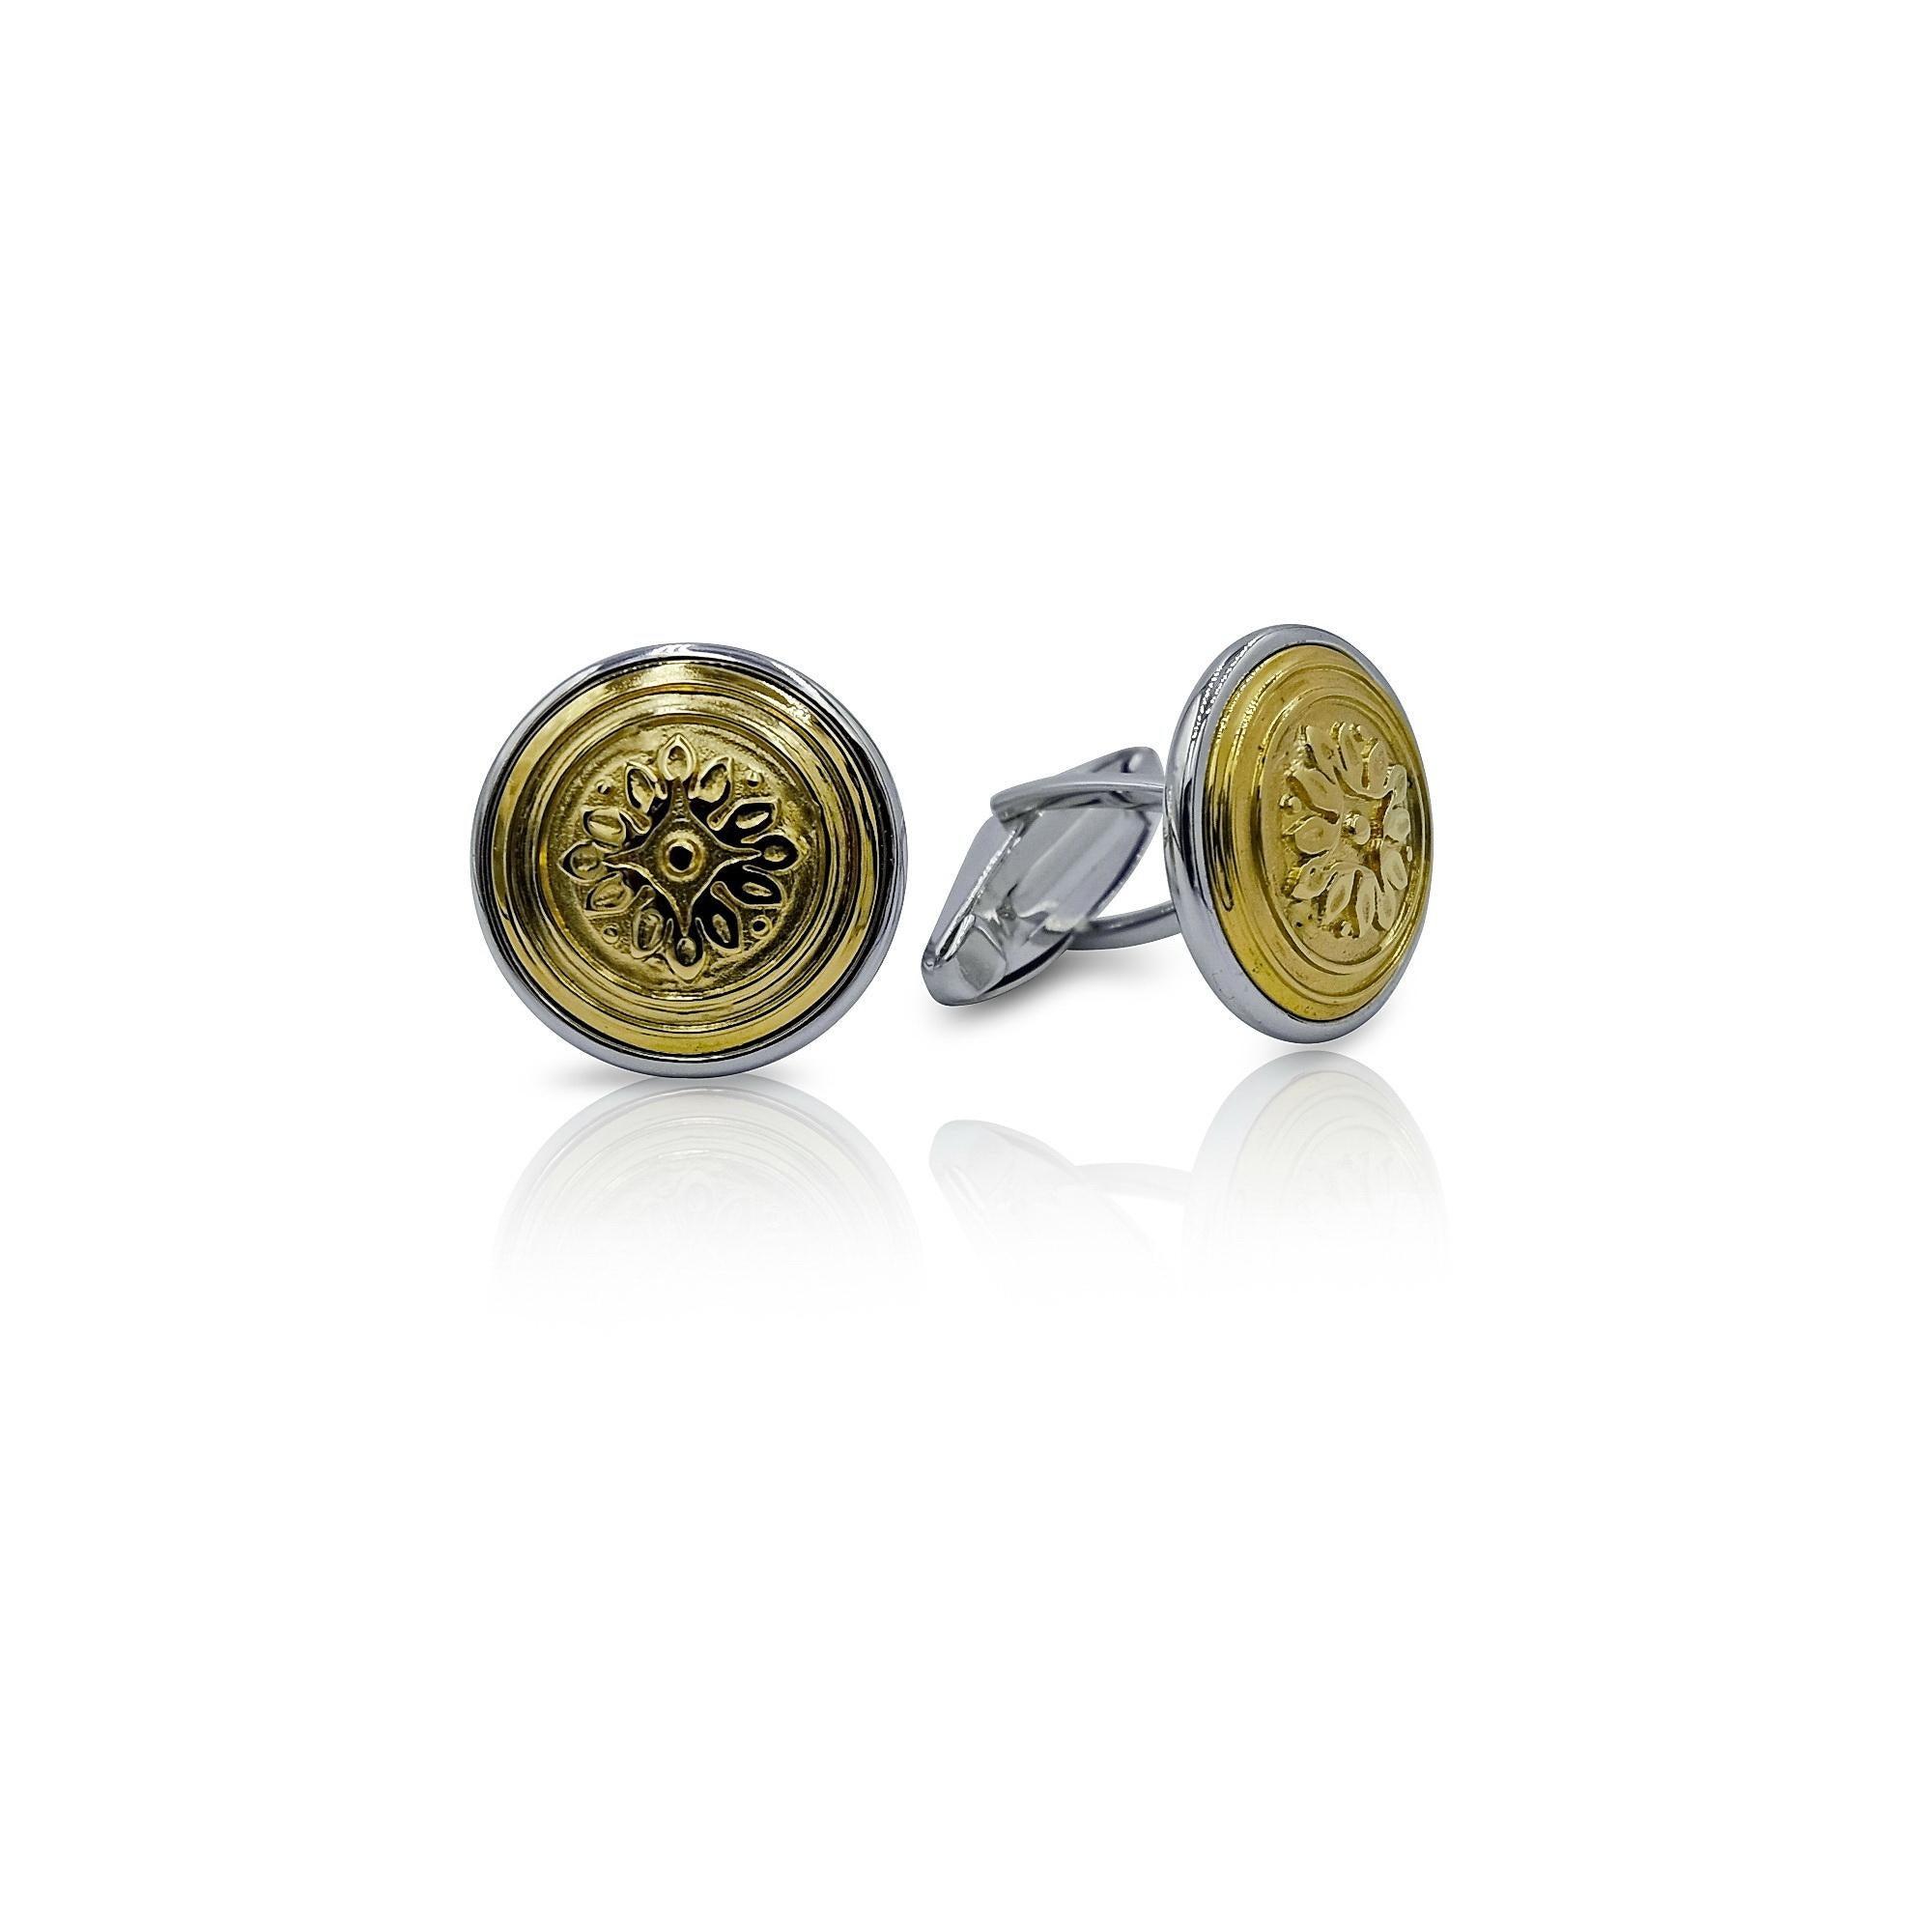 Luca Jouel Decorative Cufflinks Trio in Yellow Gold and Silver For Sale 6